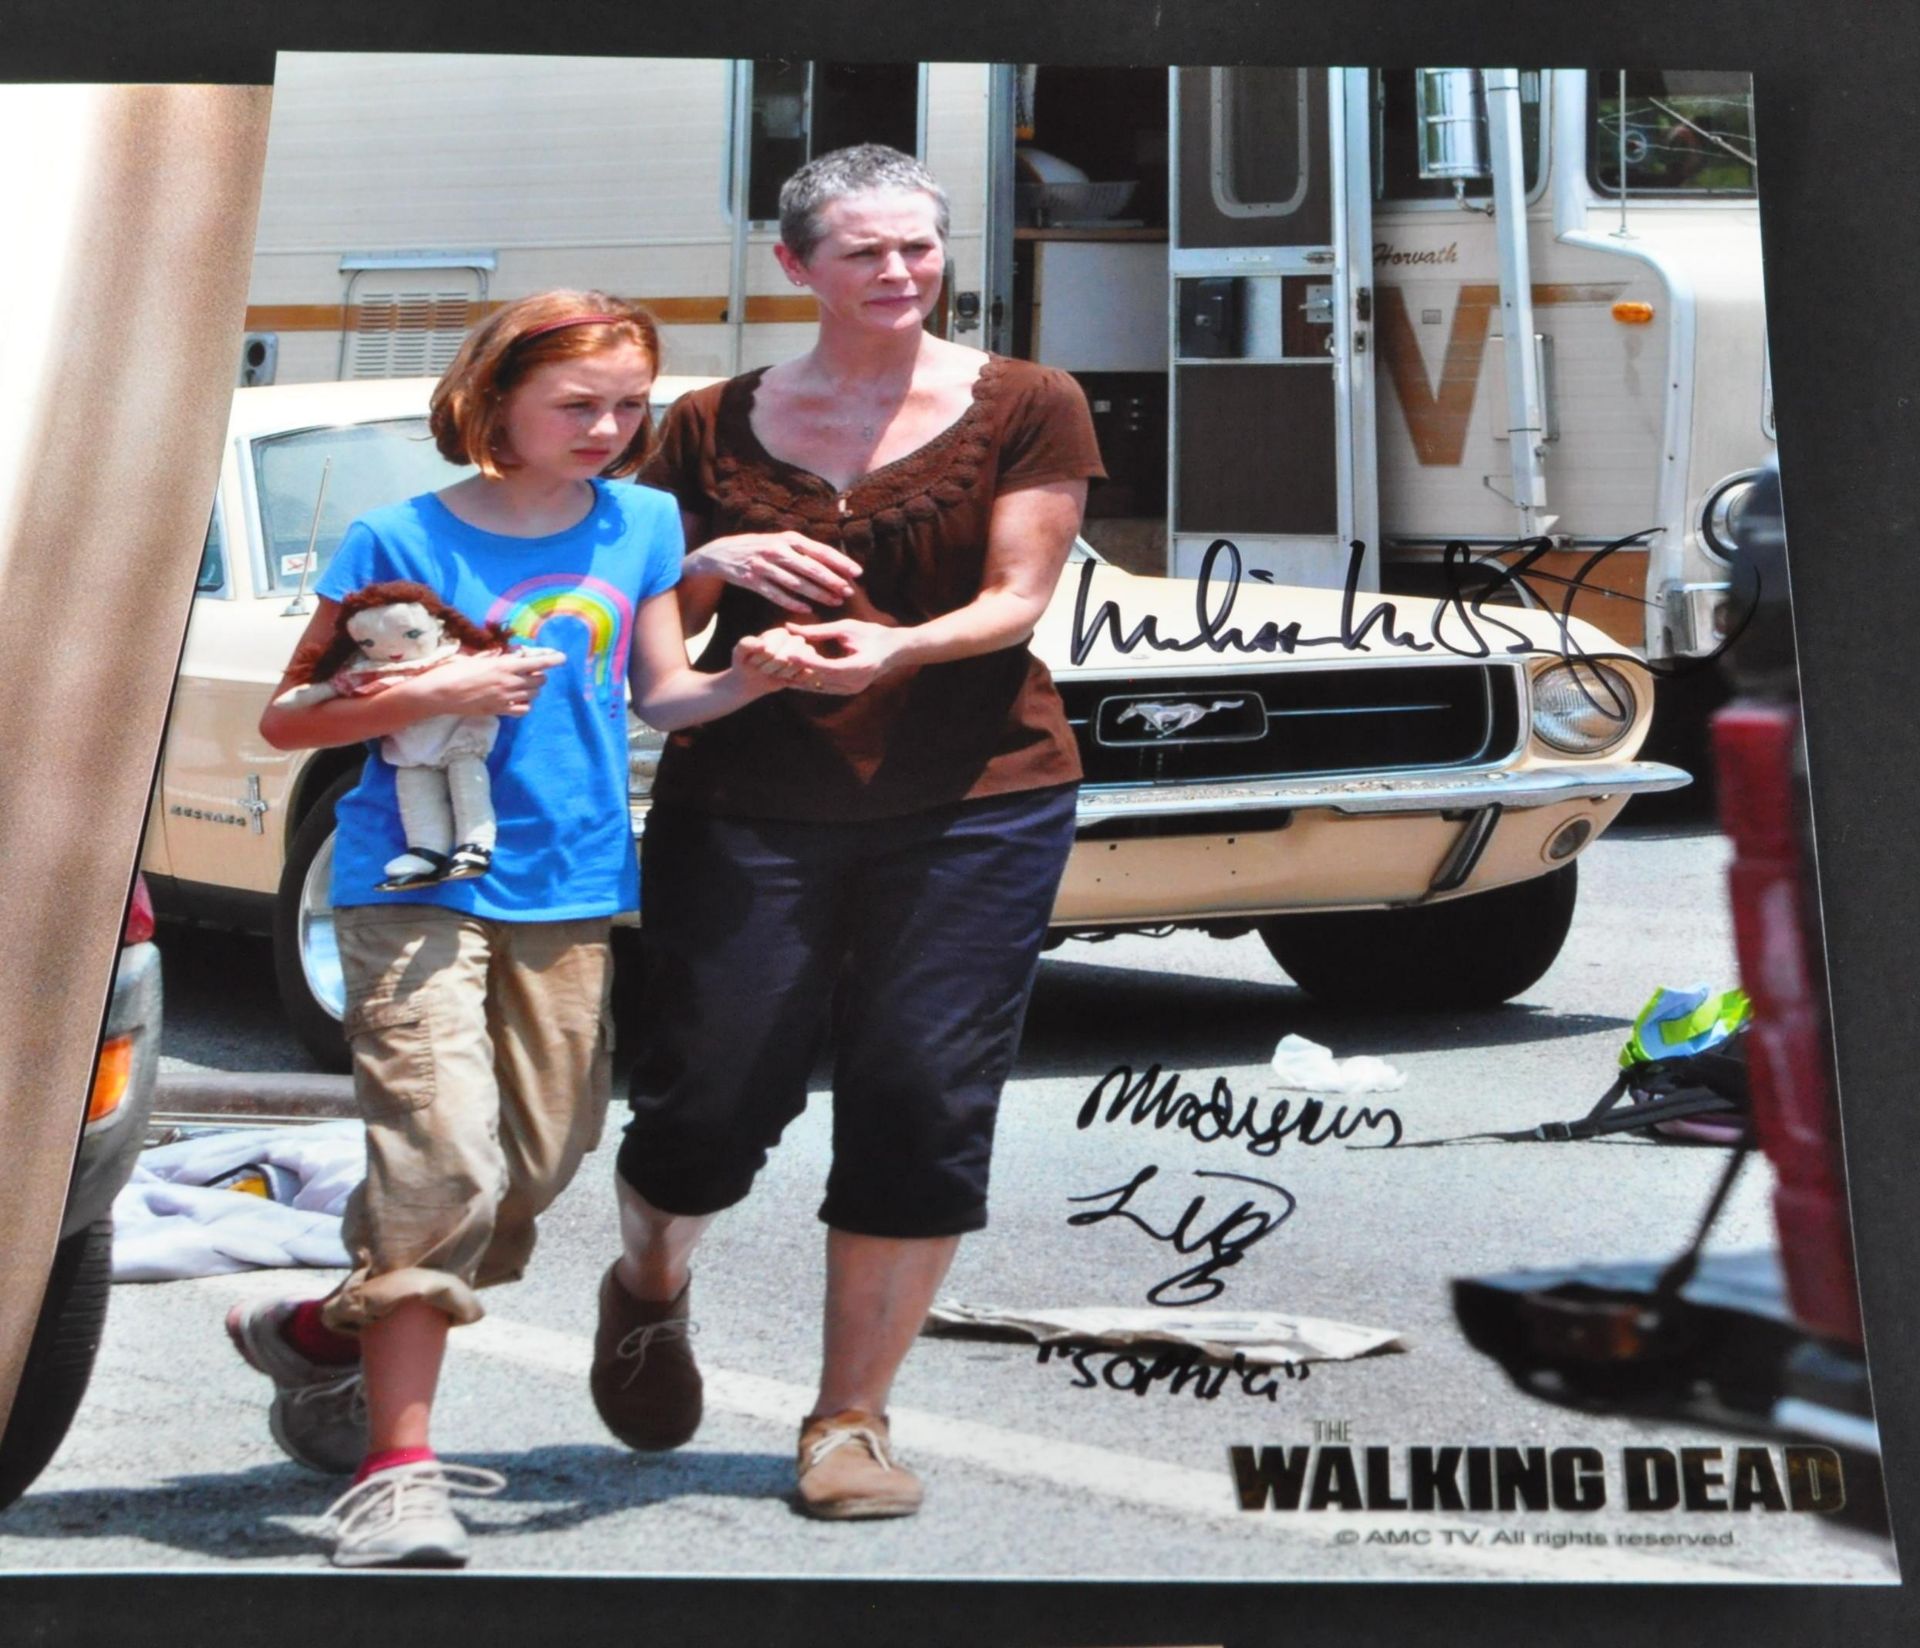 THE WALKING DEAD - COLLECTION OF AUTOGRAPHED 8X10" PHOTOS - Image 3 of 4